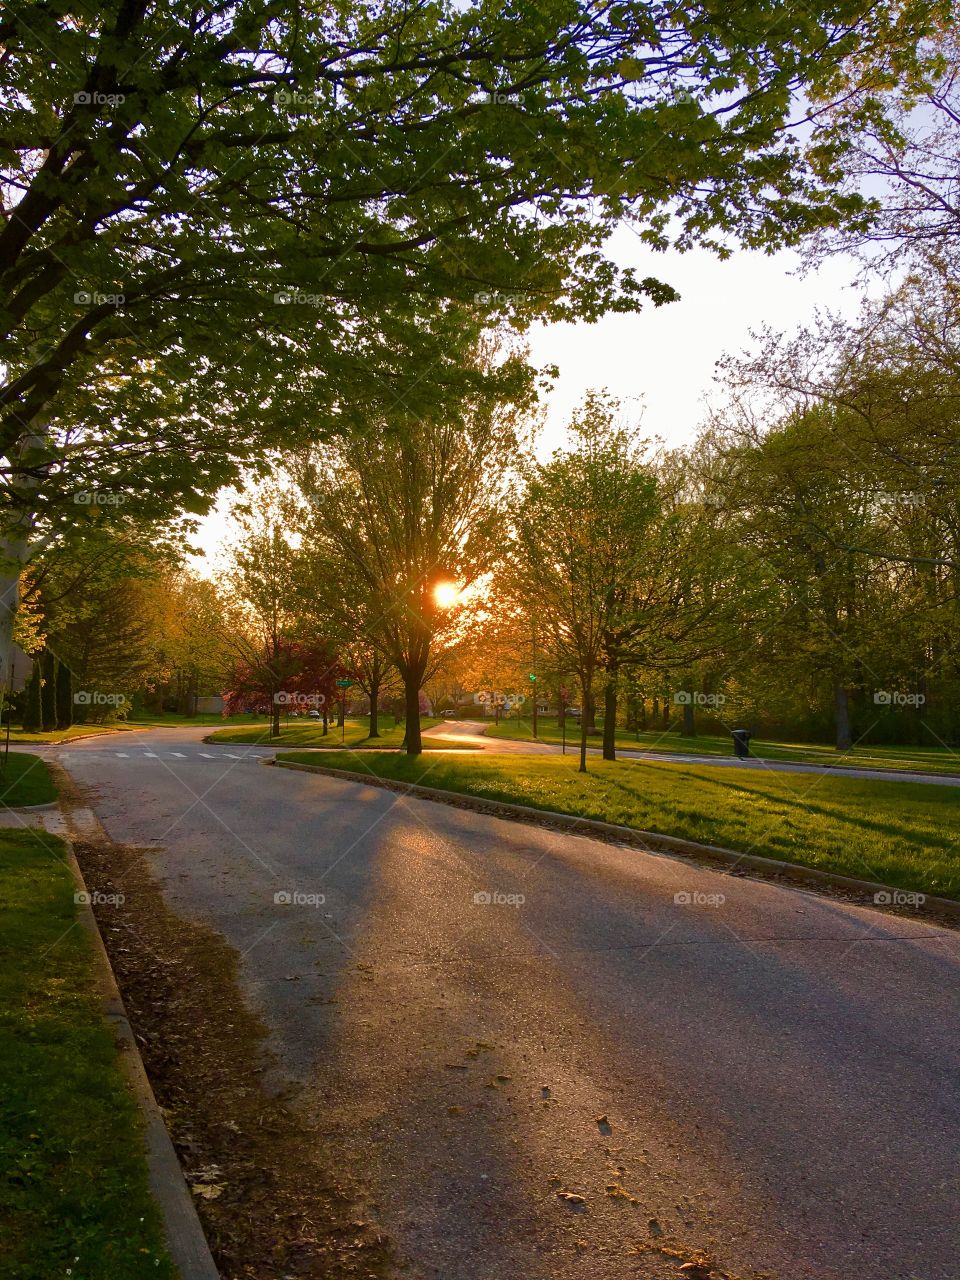 A Neighborhood run with nature and an orange sun-hit the pavement